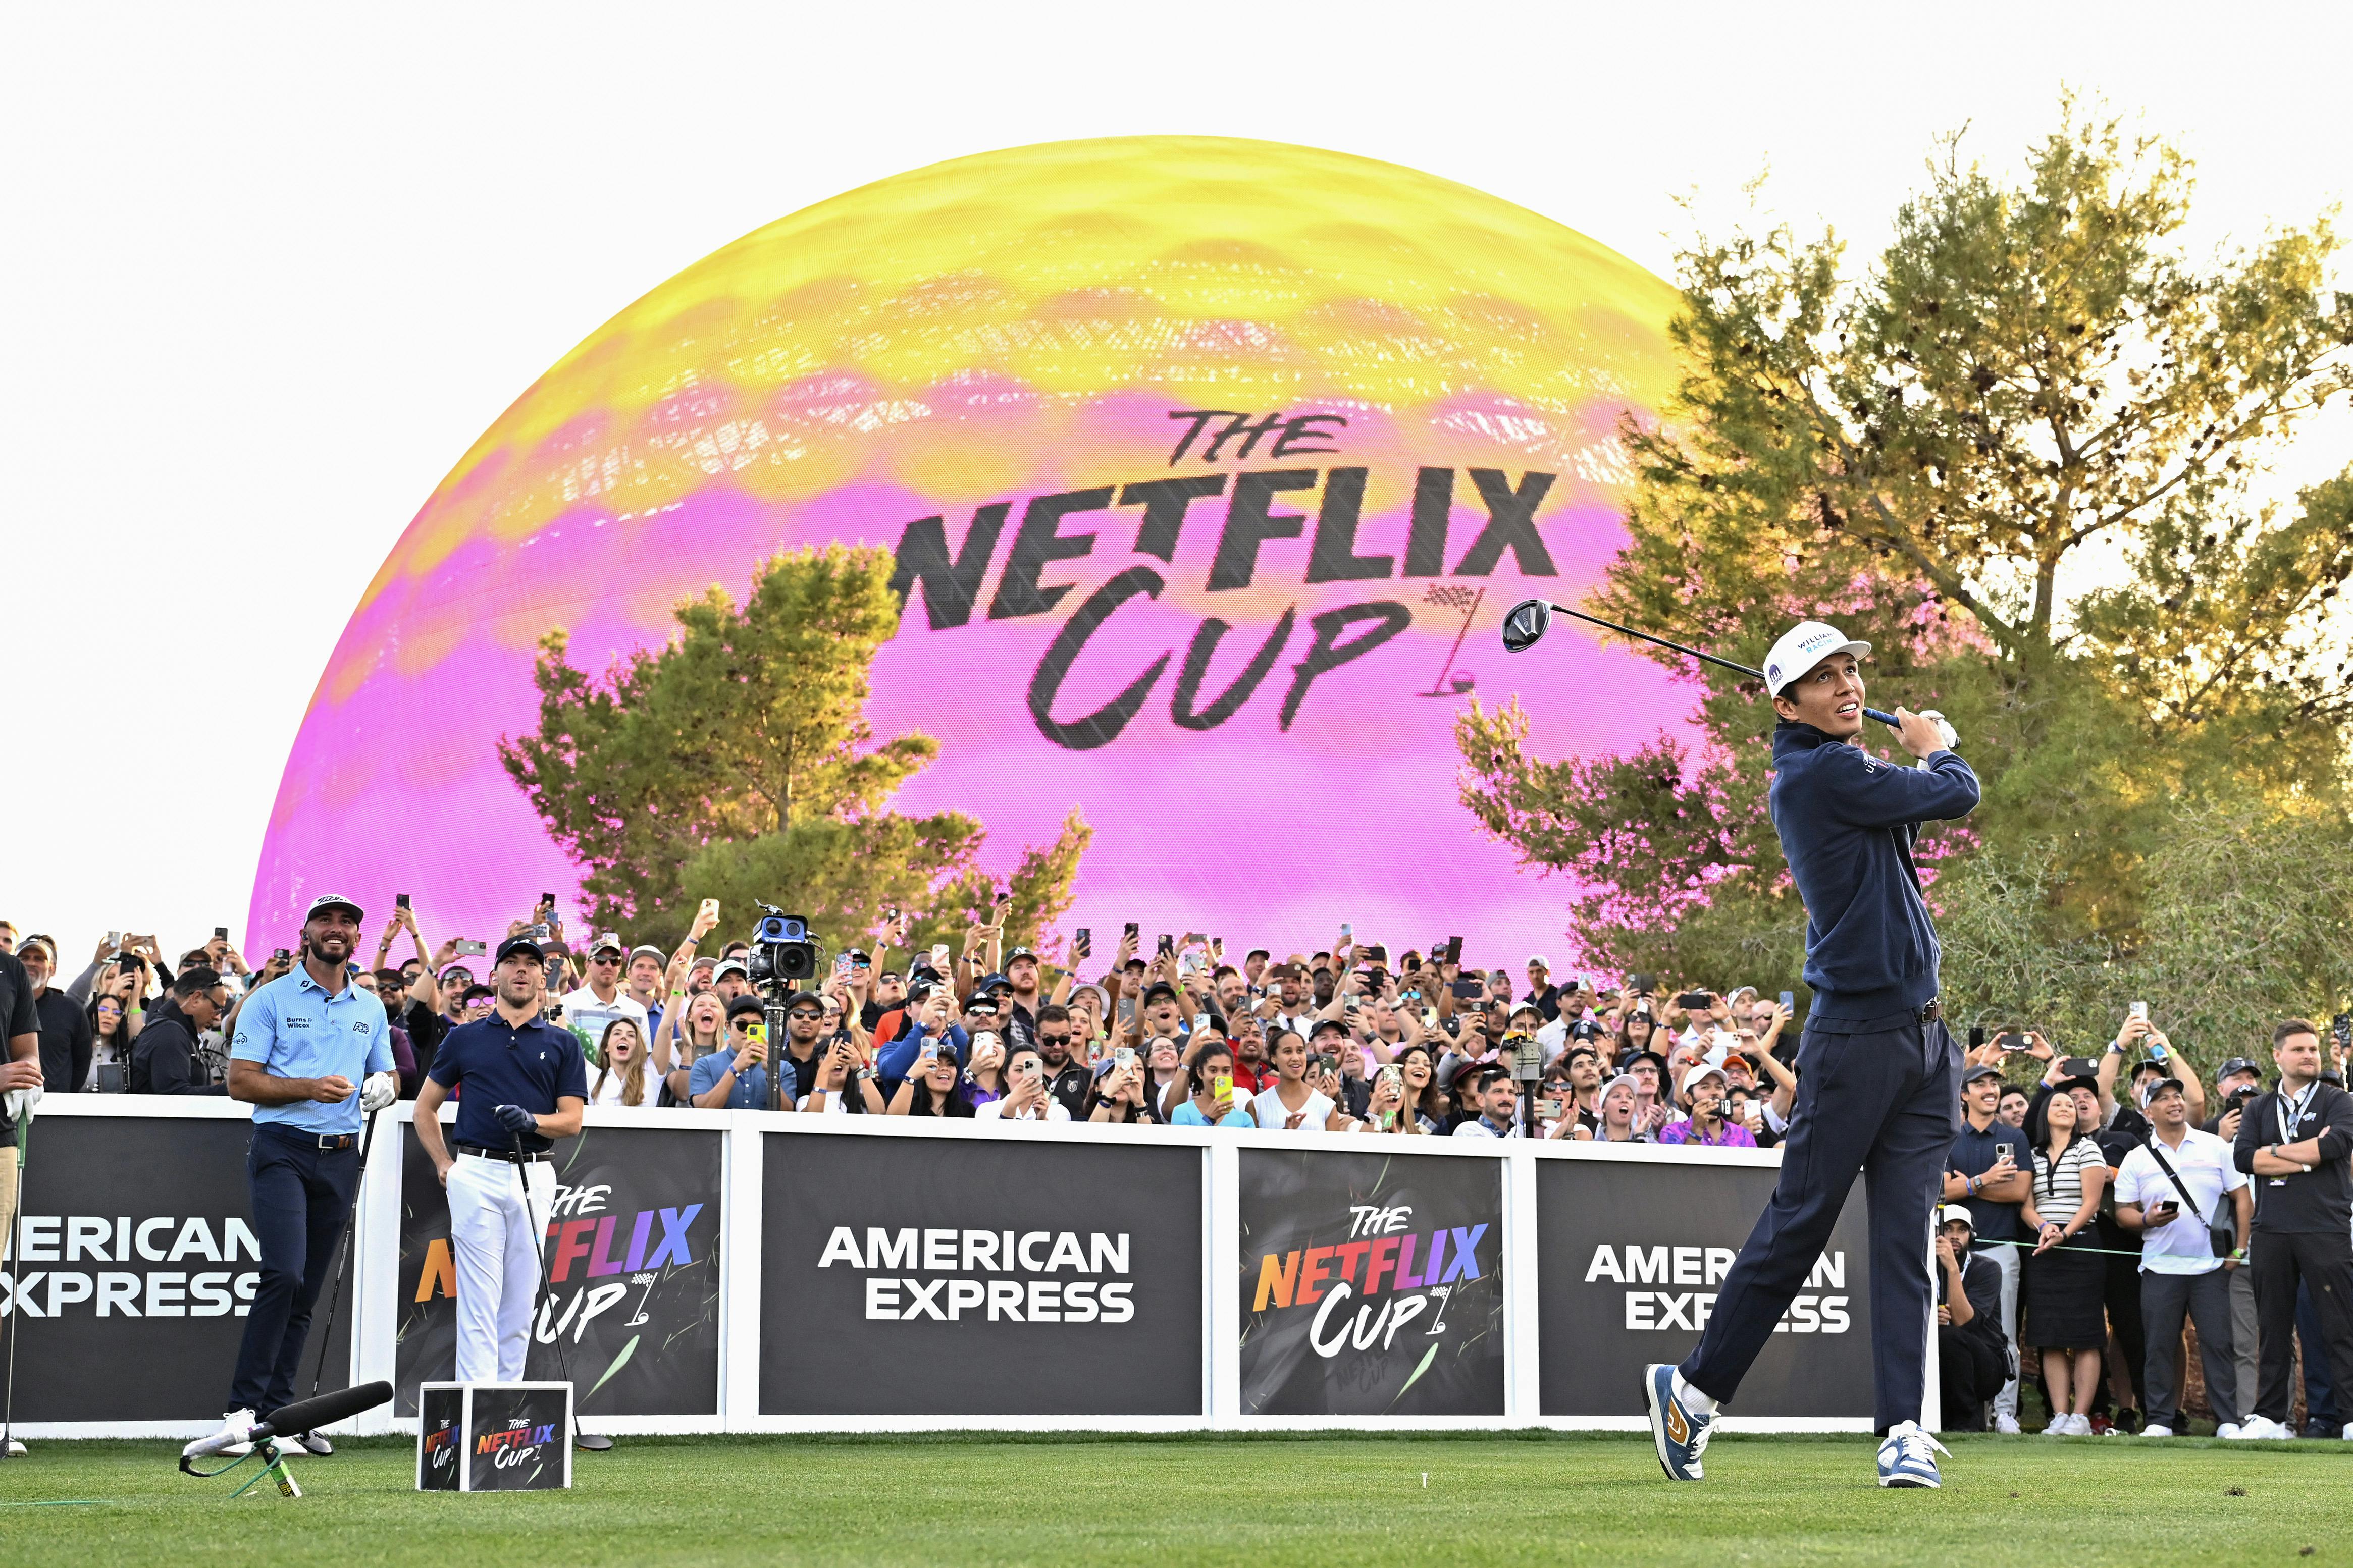 A massive yellow-and-pink golfball looms over a crowd of people as Alexander Albon swings.